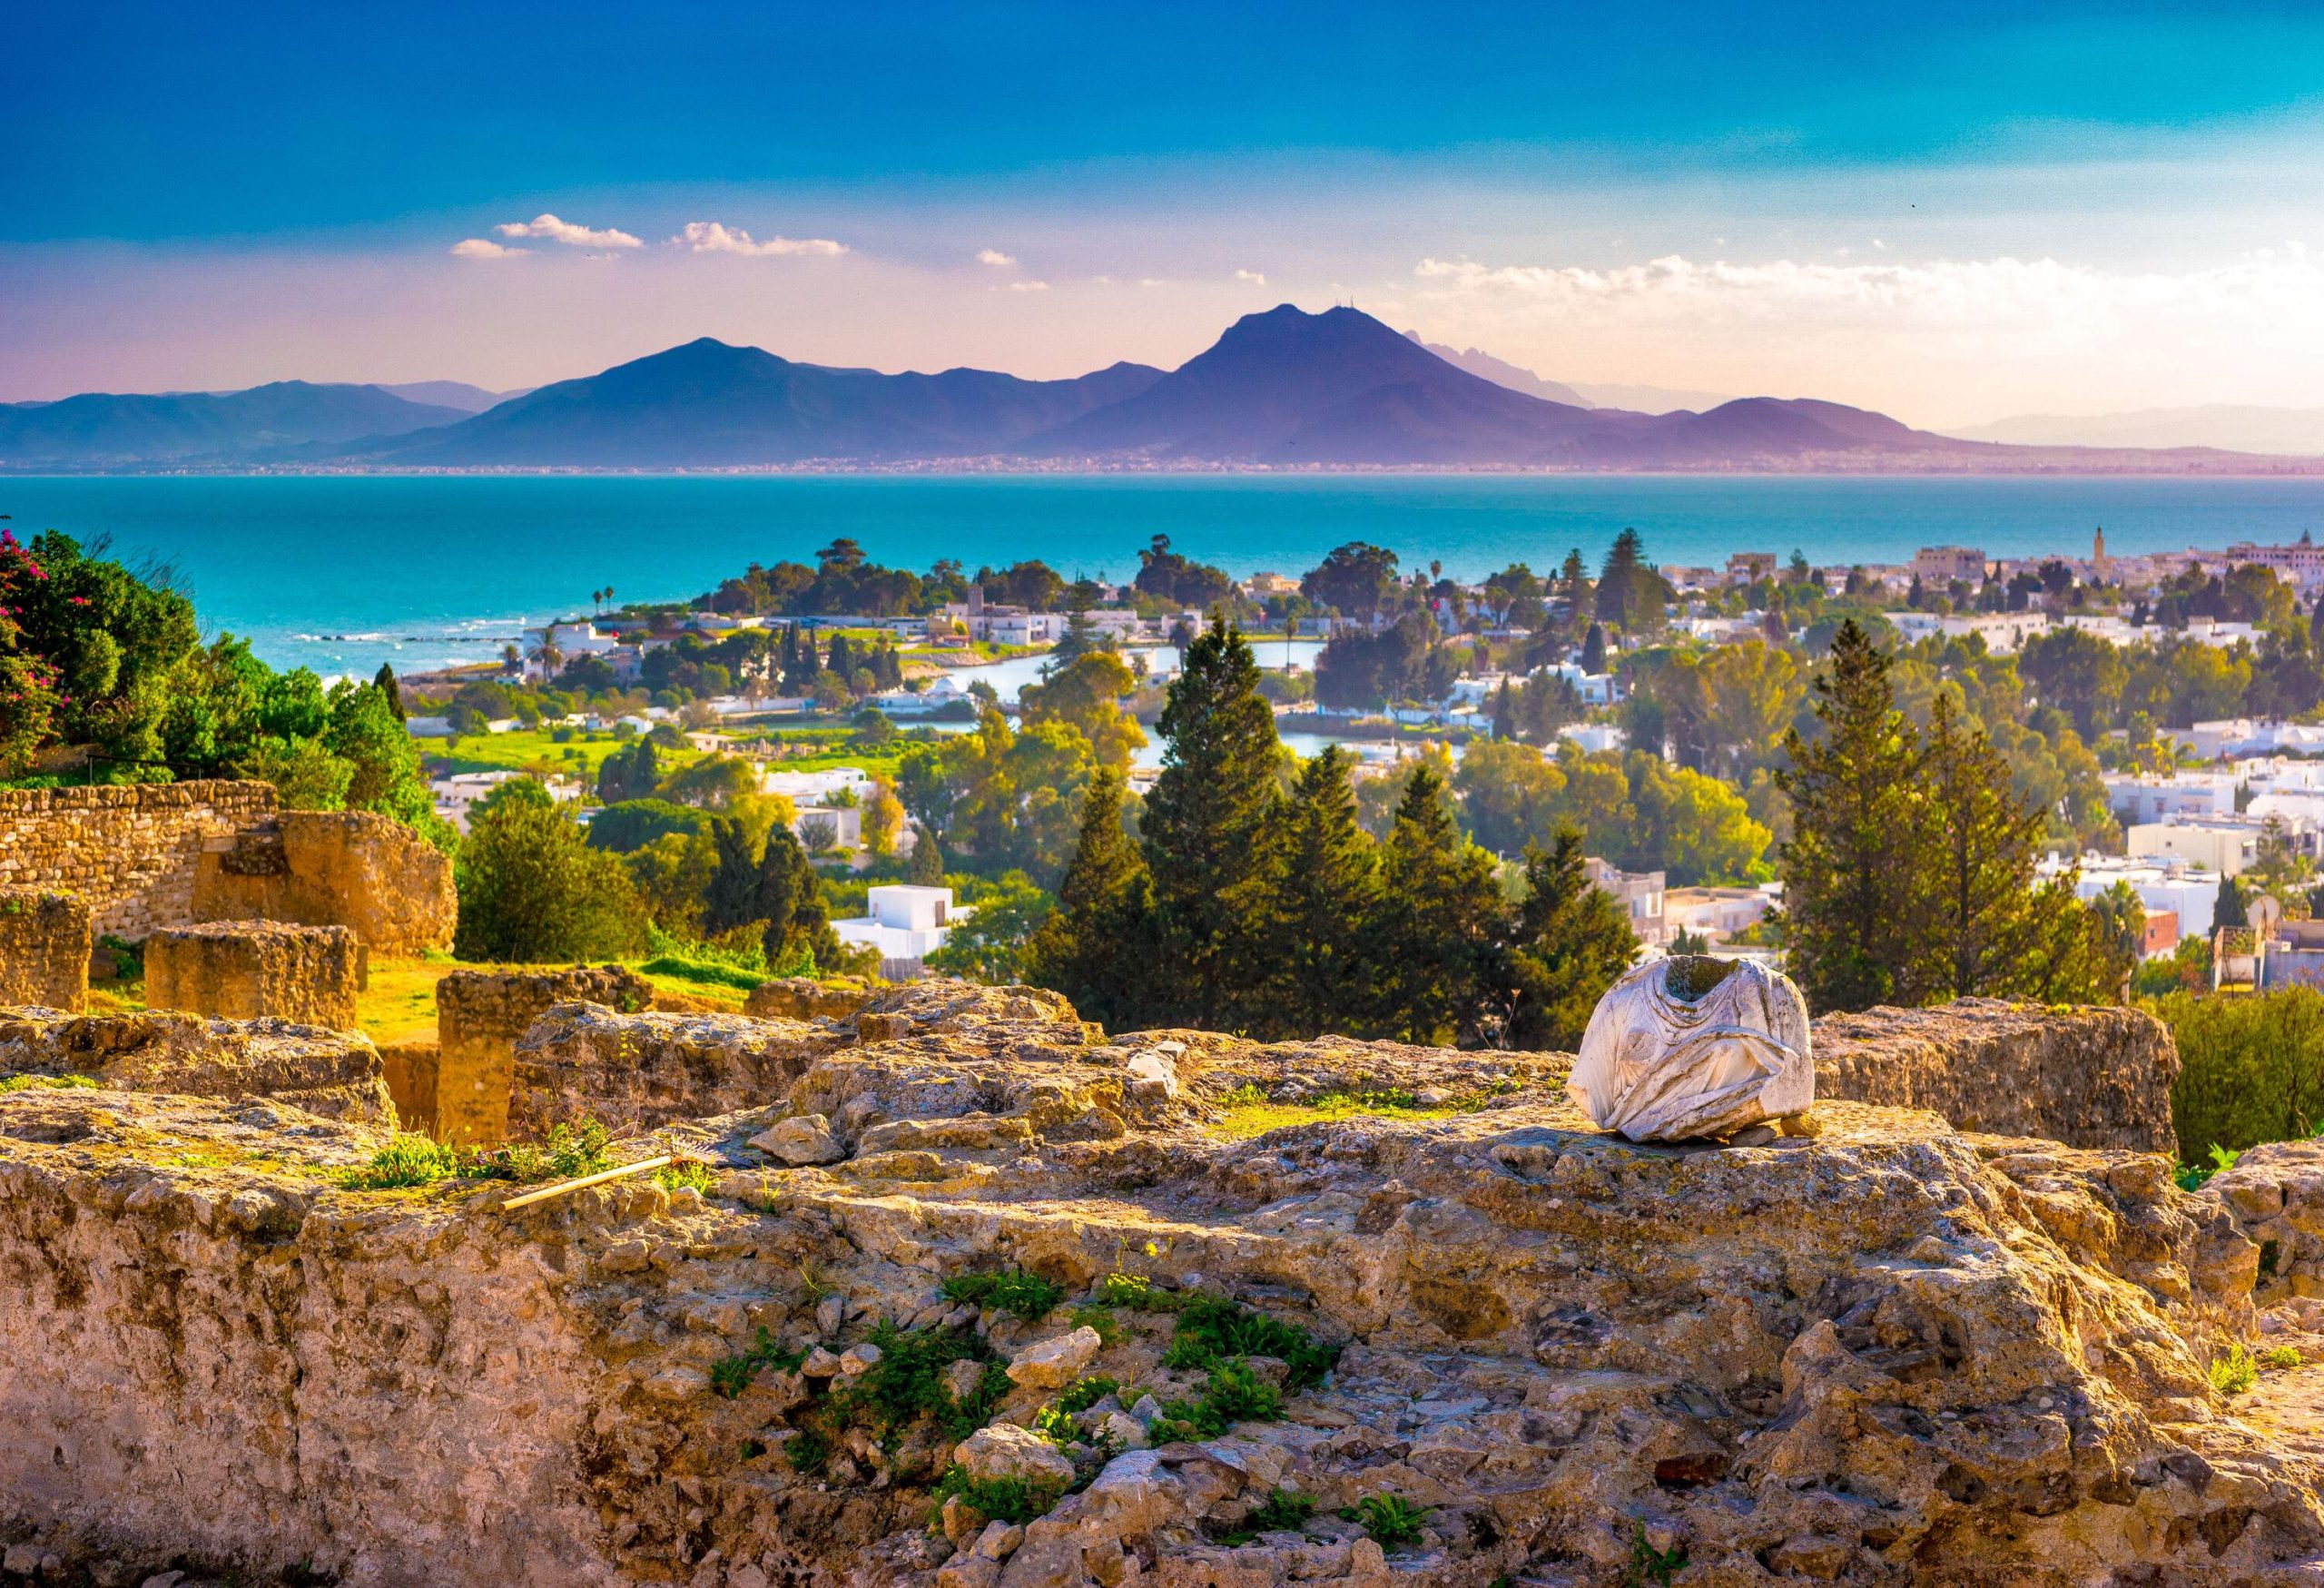 The archaeological site remains of ancient Carthage, perched on a hill overlooking a coastal town, with the sea surrounding it and the silhouette of a majestic mountain range in the distance.